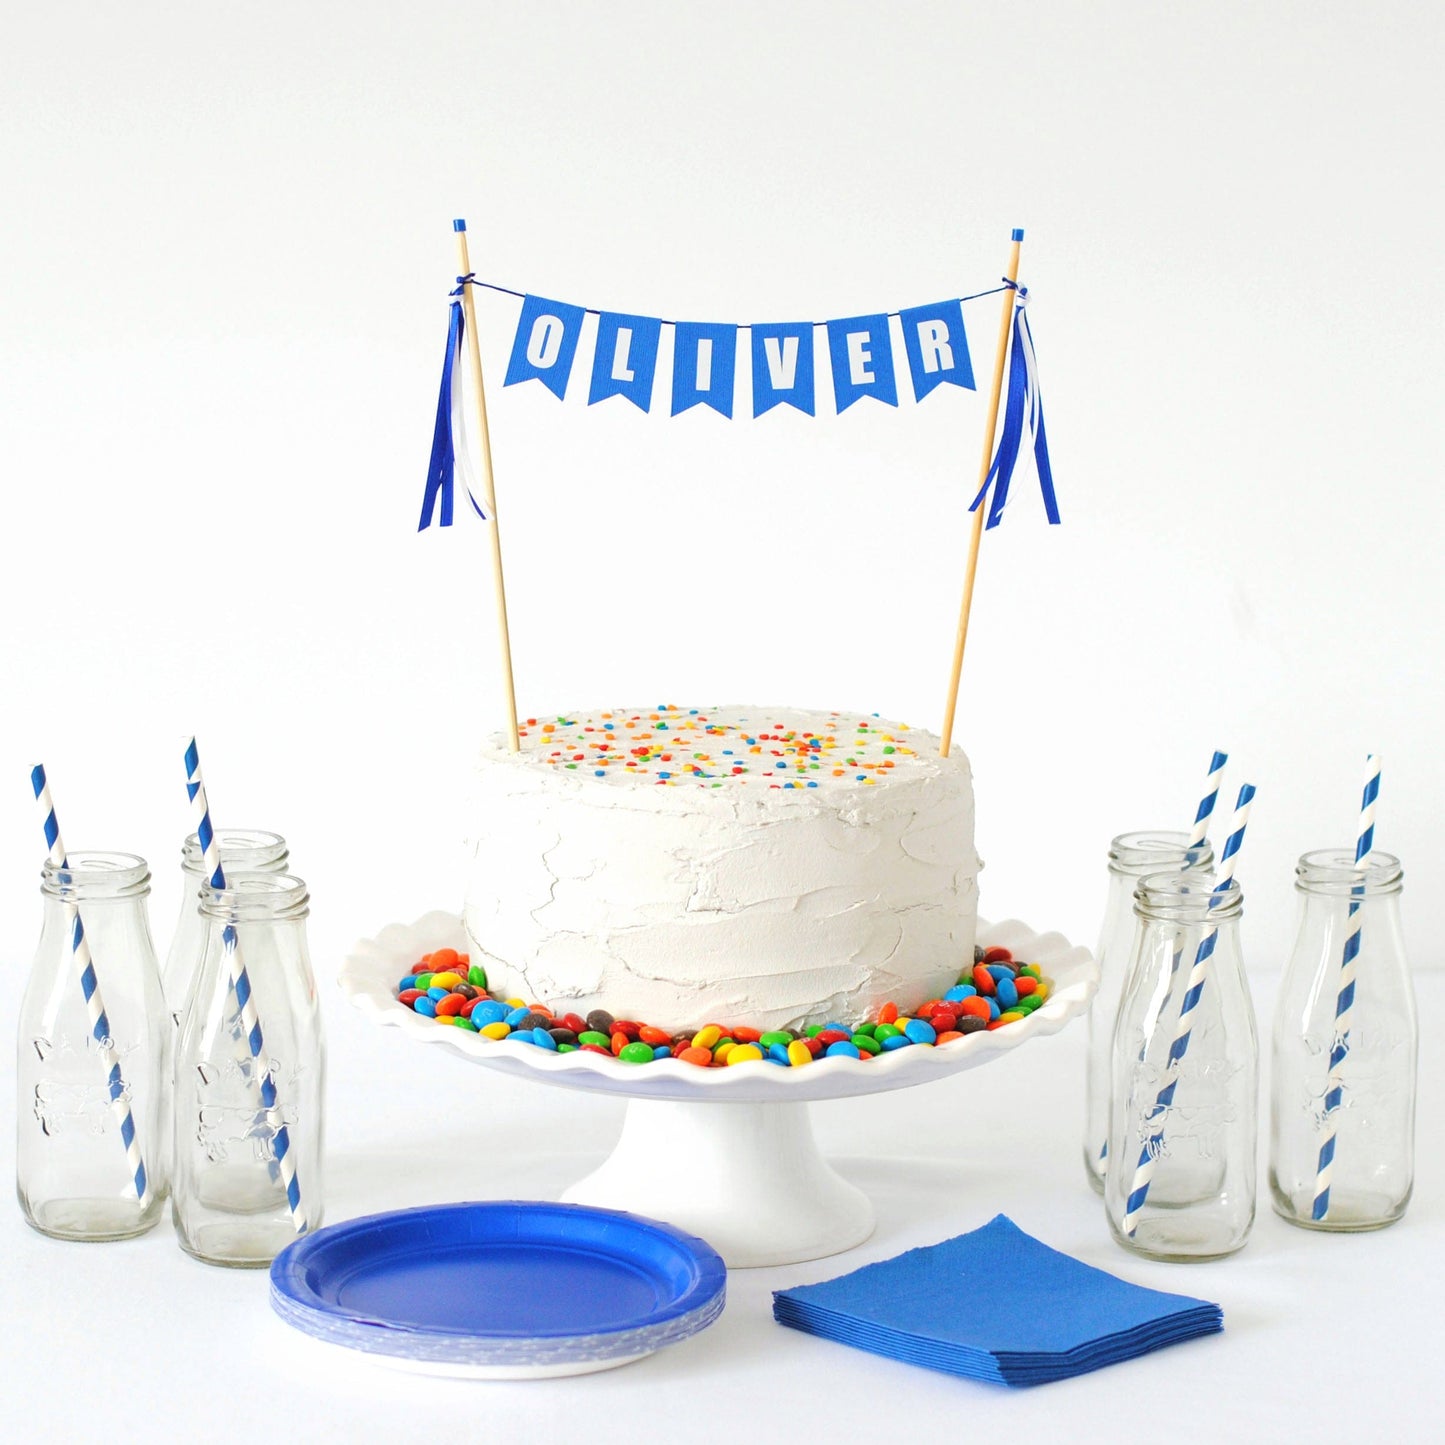 
                  
                    royal blue birthday cake topper personalized with name on a white cake with colorful sprinkles
                  
                